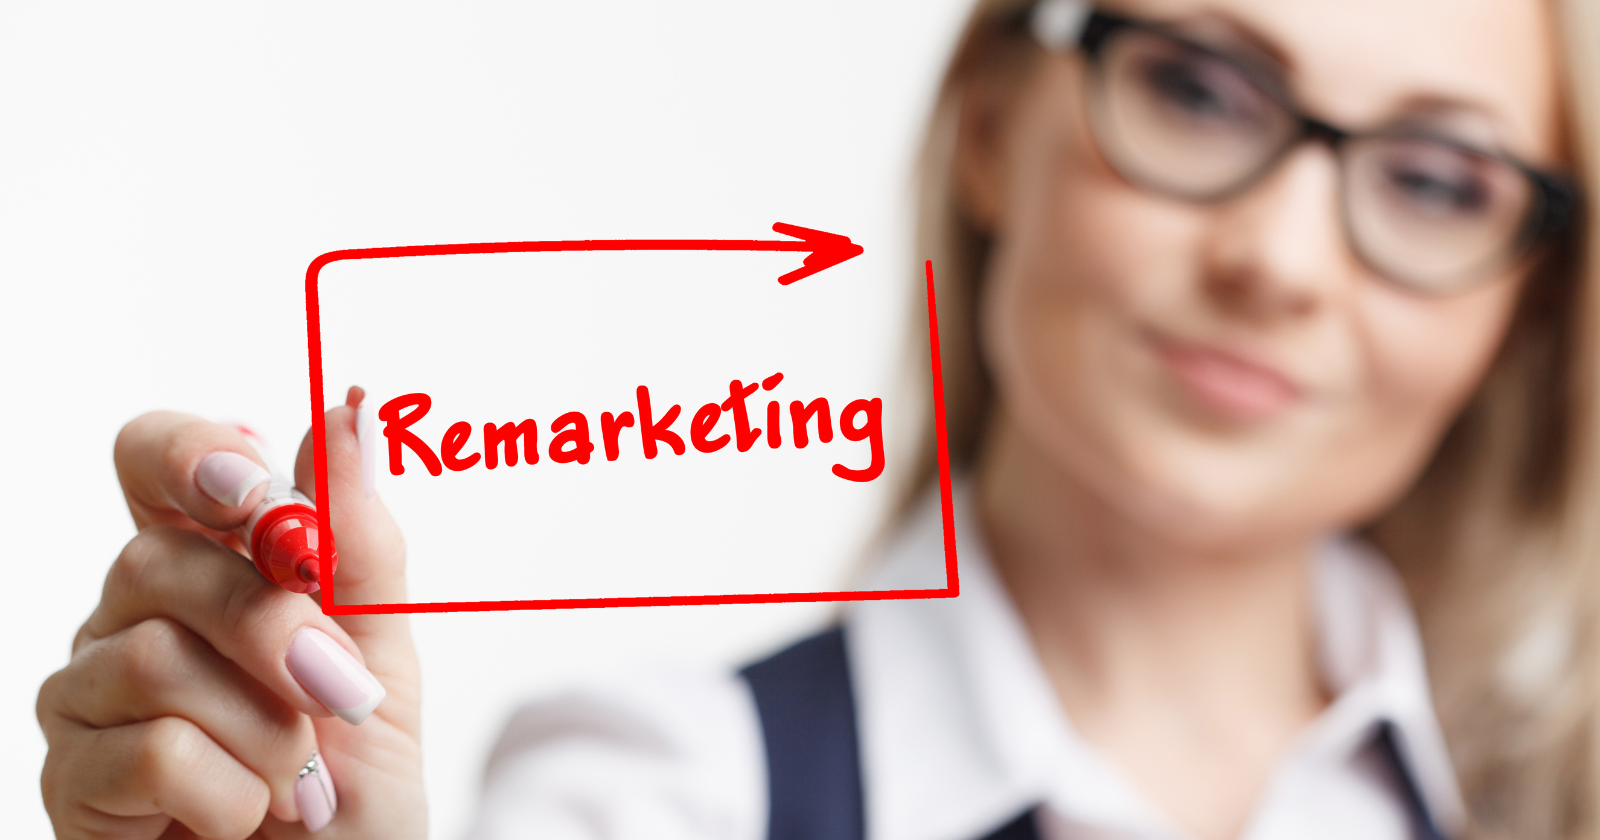 8 Types Of Remarketing To Consider